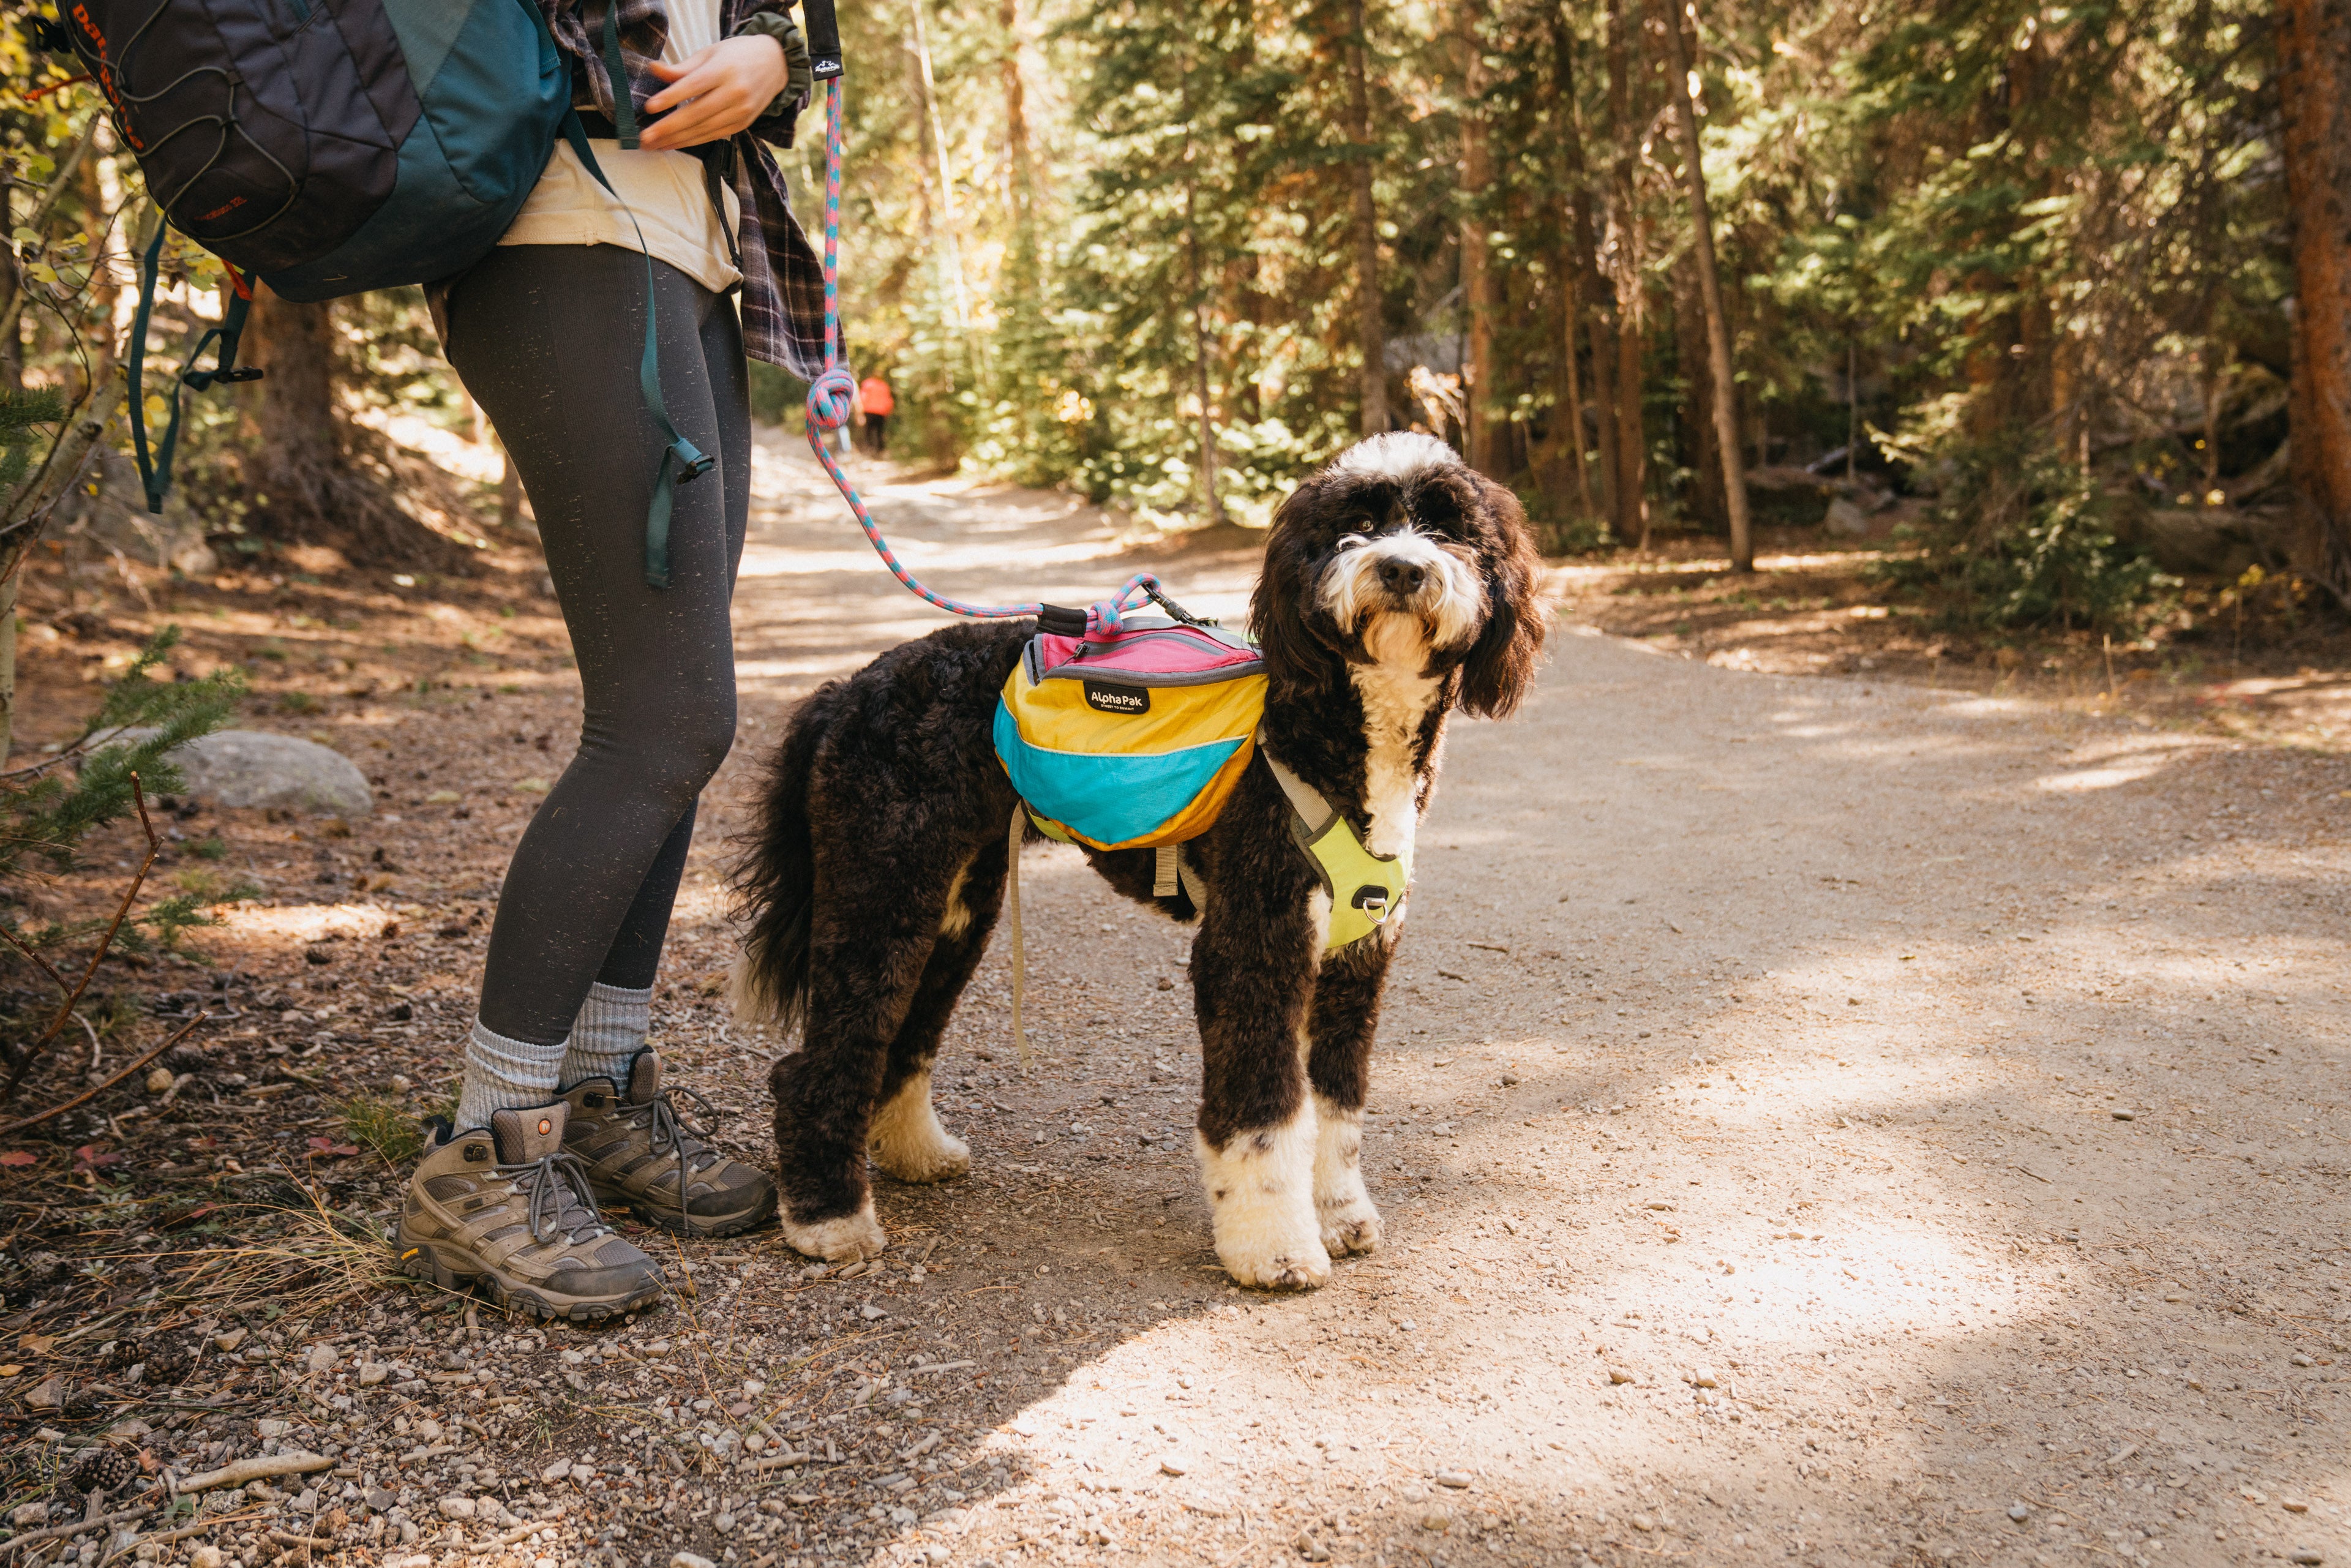 Benefits of Camping and Hiking With Dogs